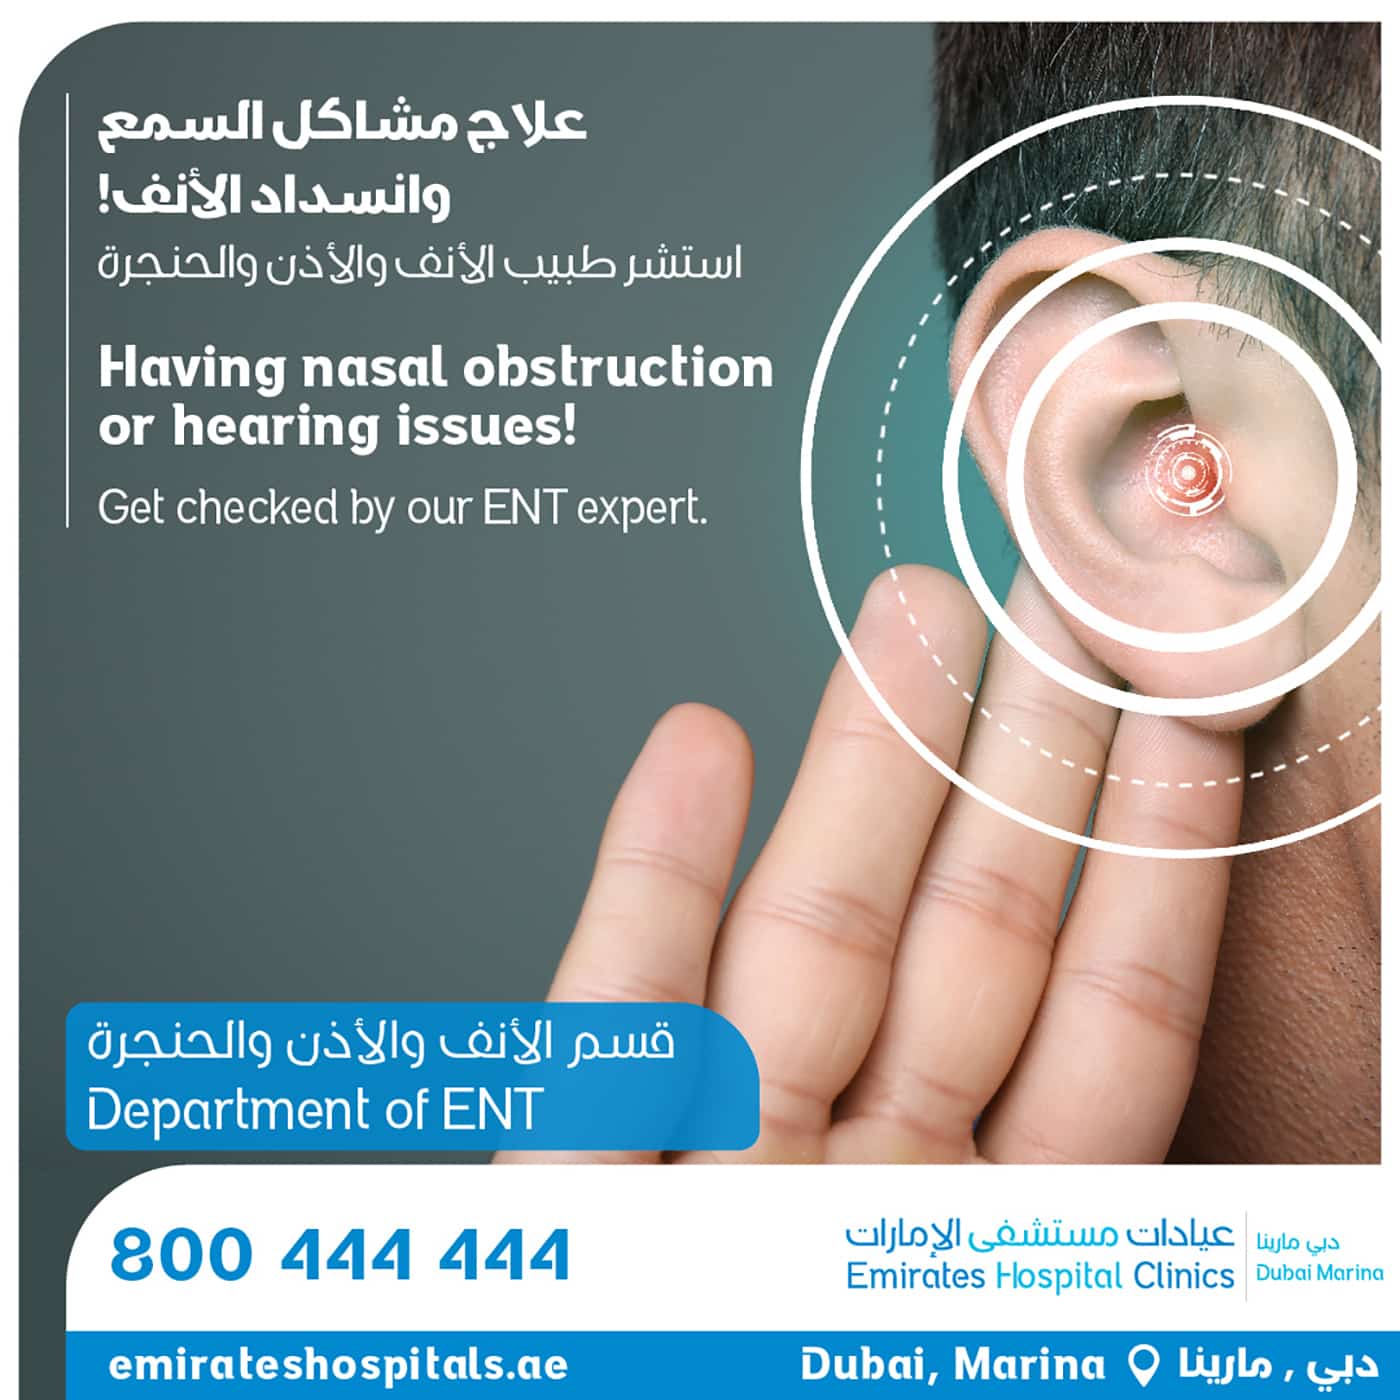 Having nasal obstruction or hearing issues